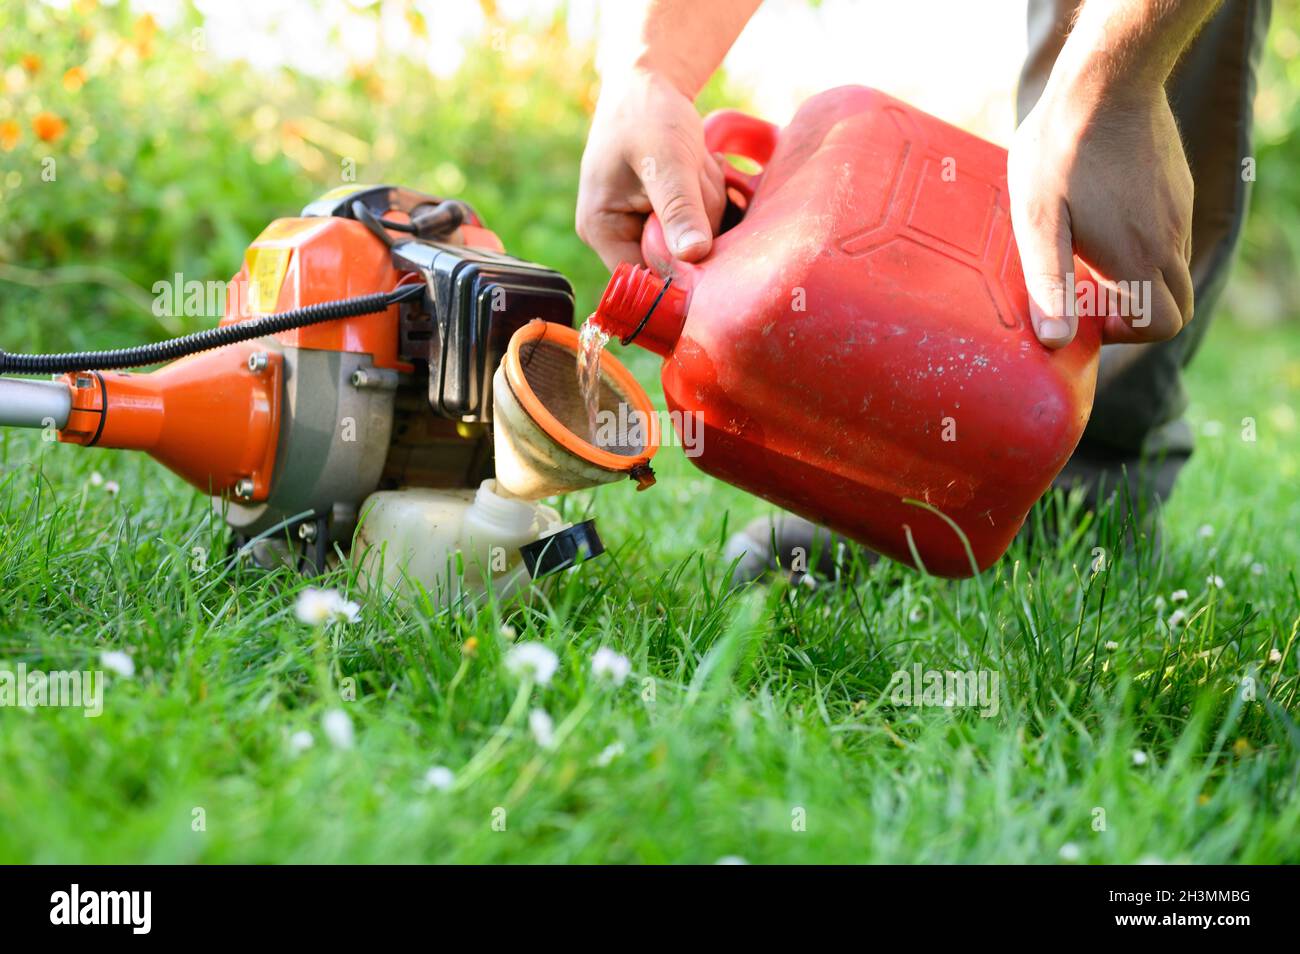 Gardener refueling brush cutter close up. Gardening tools maintenance. Lawn care with brush cutters. Stock Photo